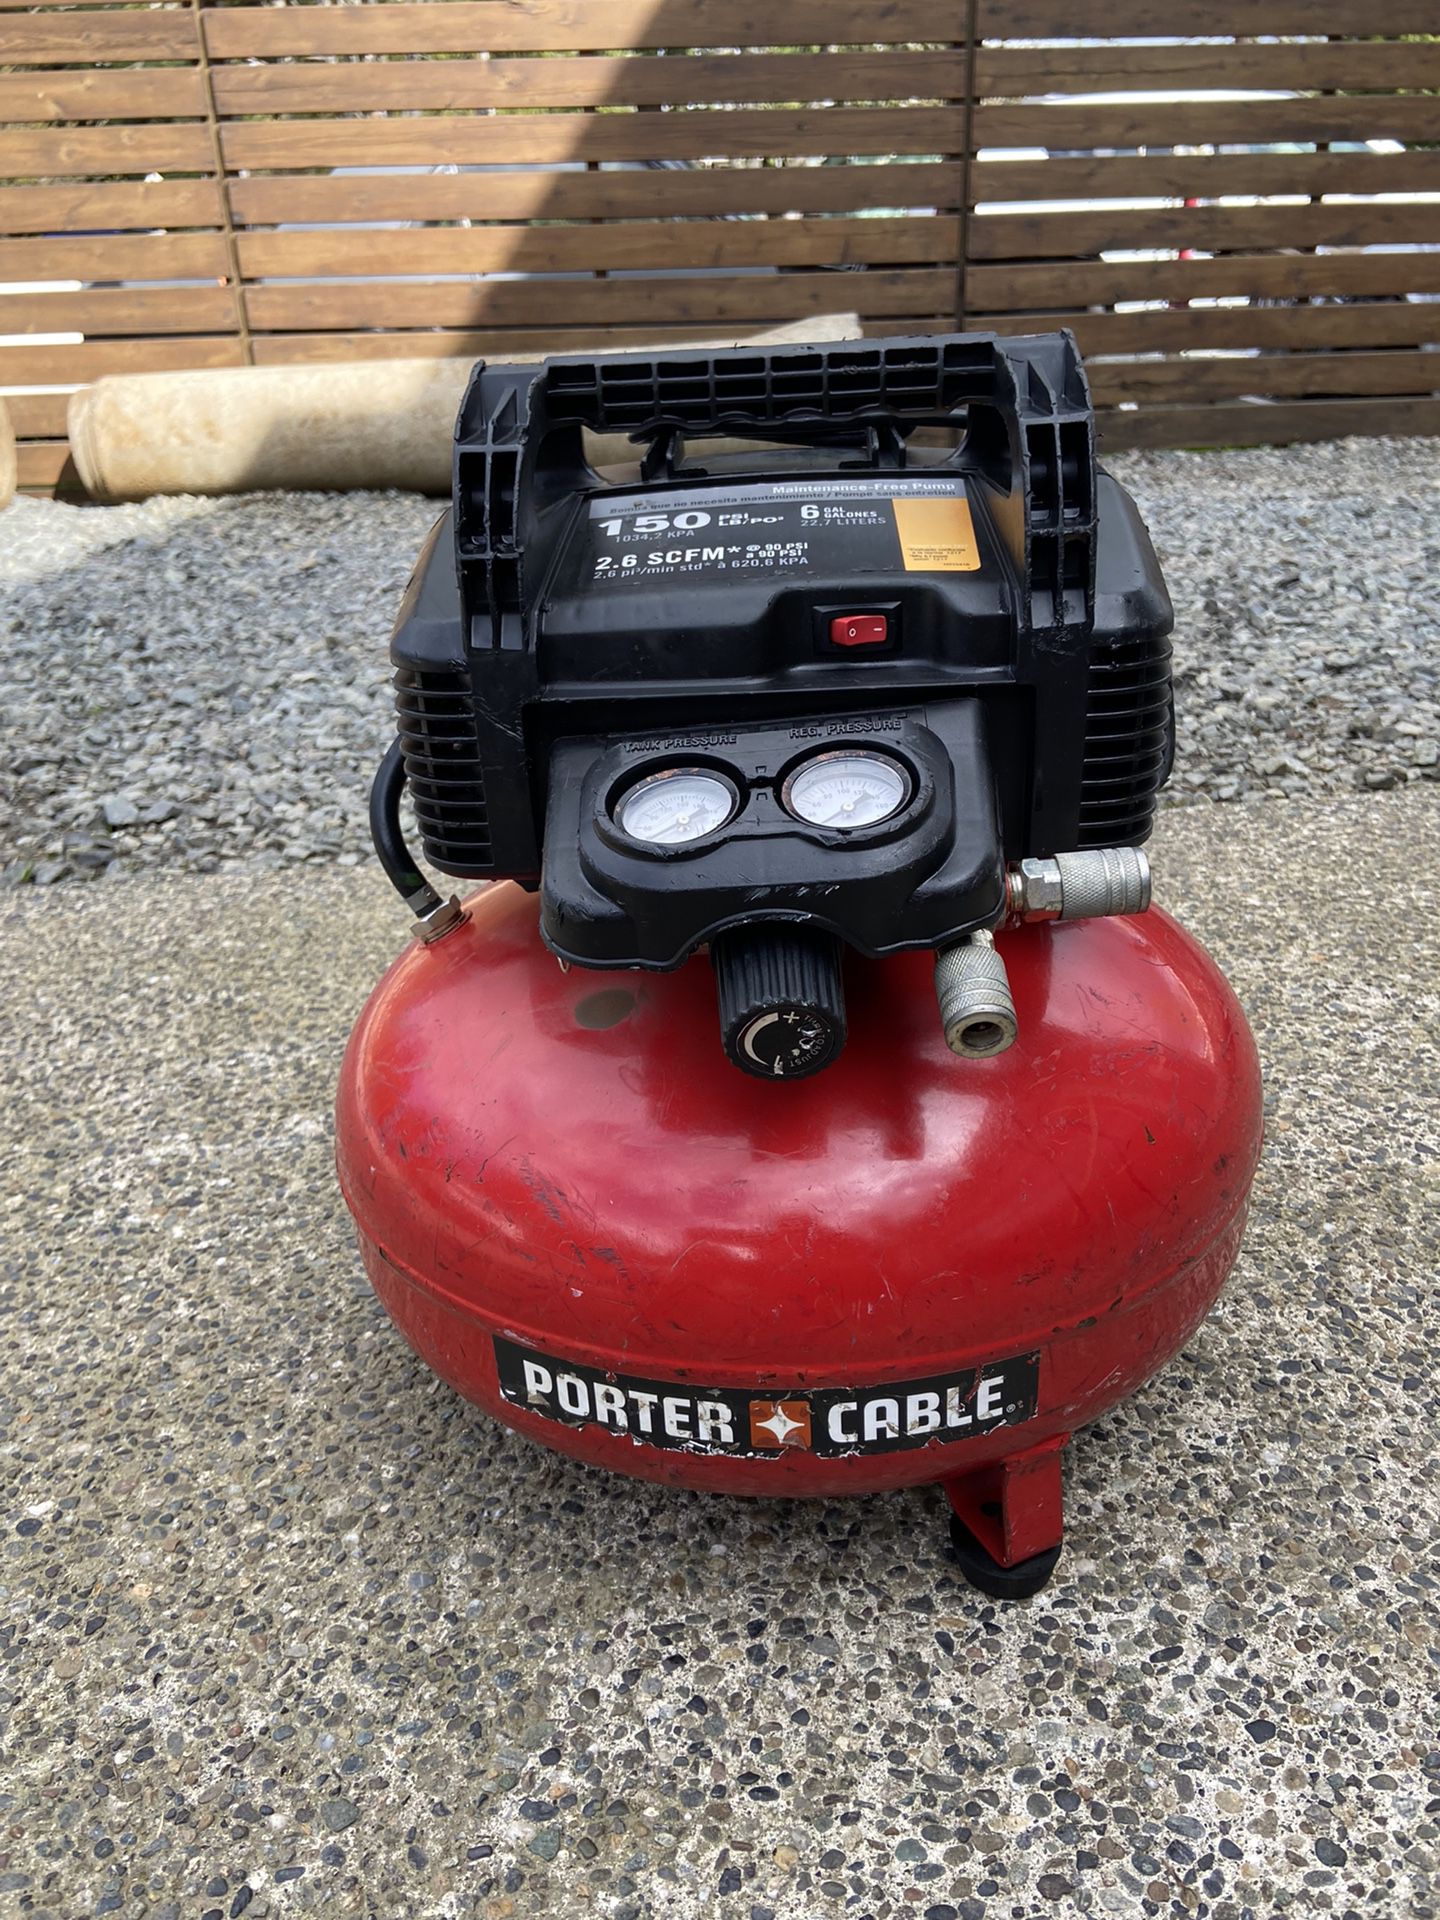 PORTER CABLE HEAVY DUTY 6 Gal AIR COMPRESSOR 